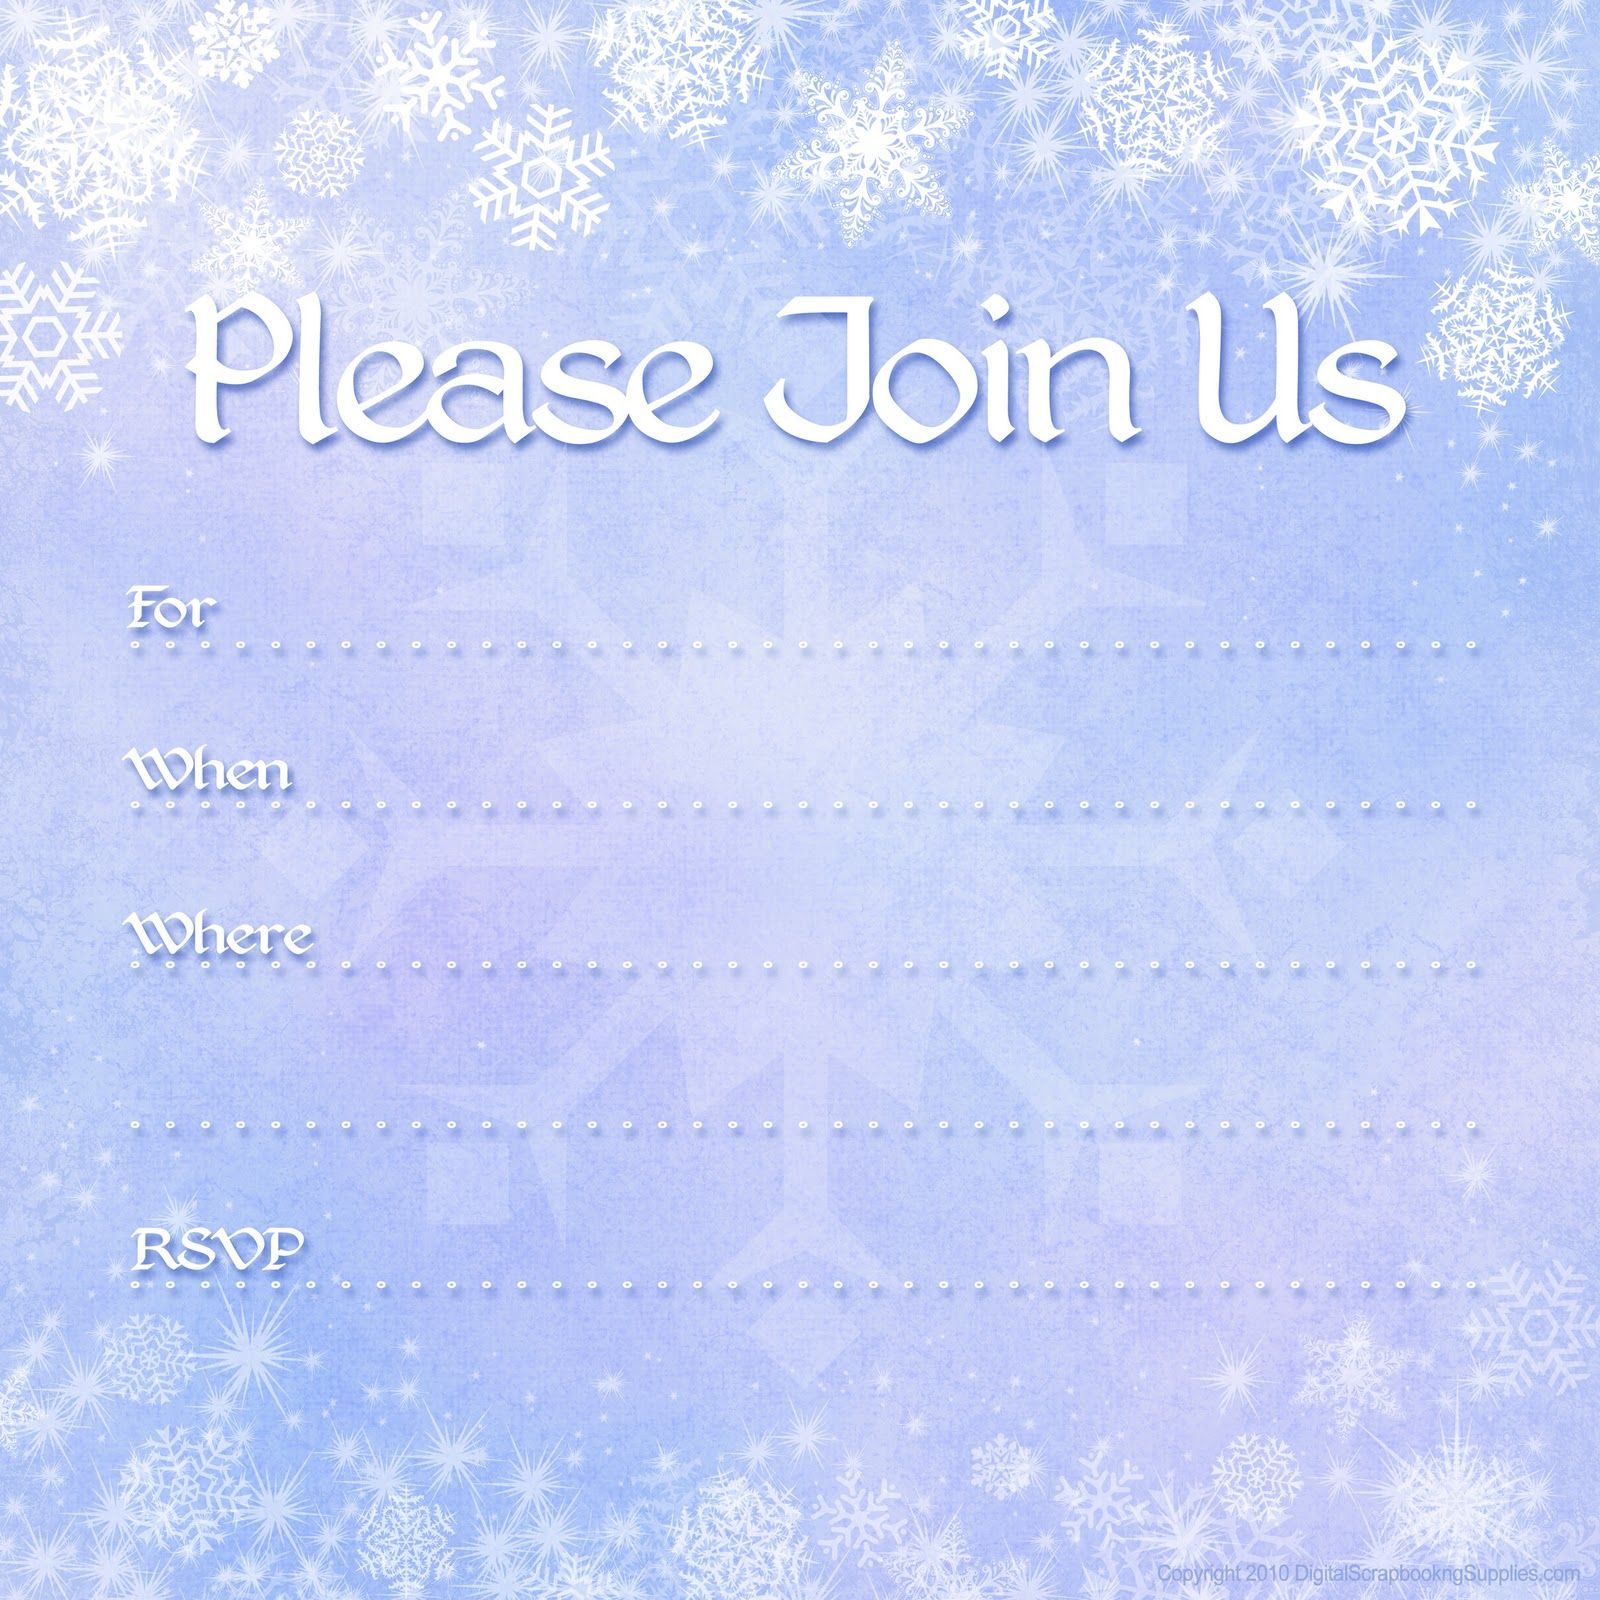 Free Printable Invites Free Printable Party Invitations Free within sizing 1600 X 1600